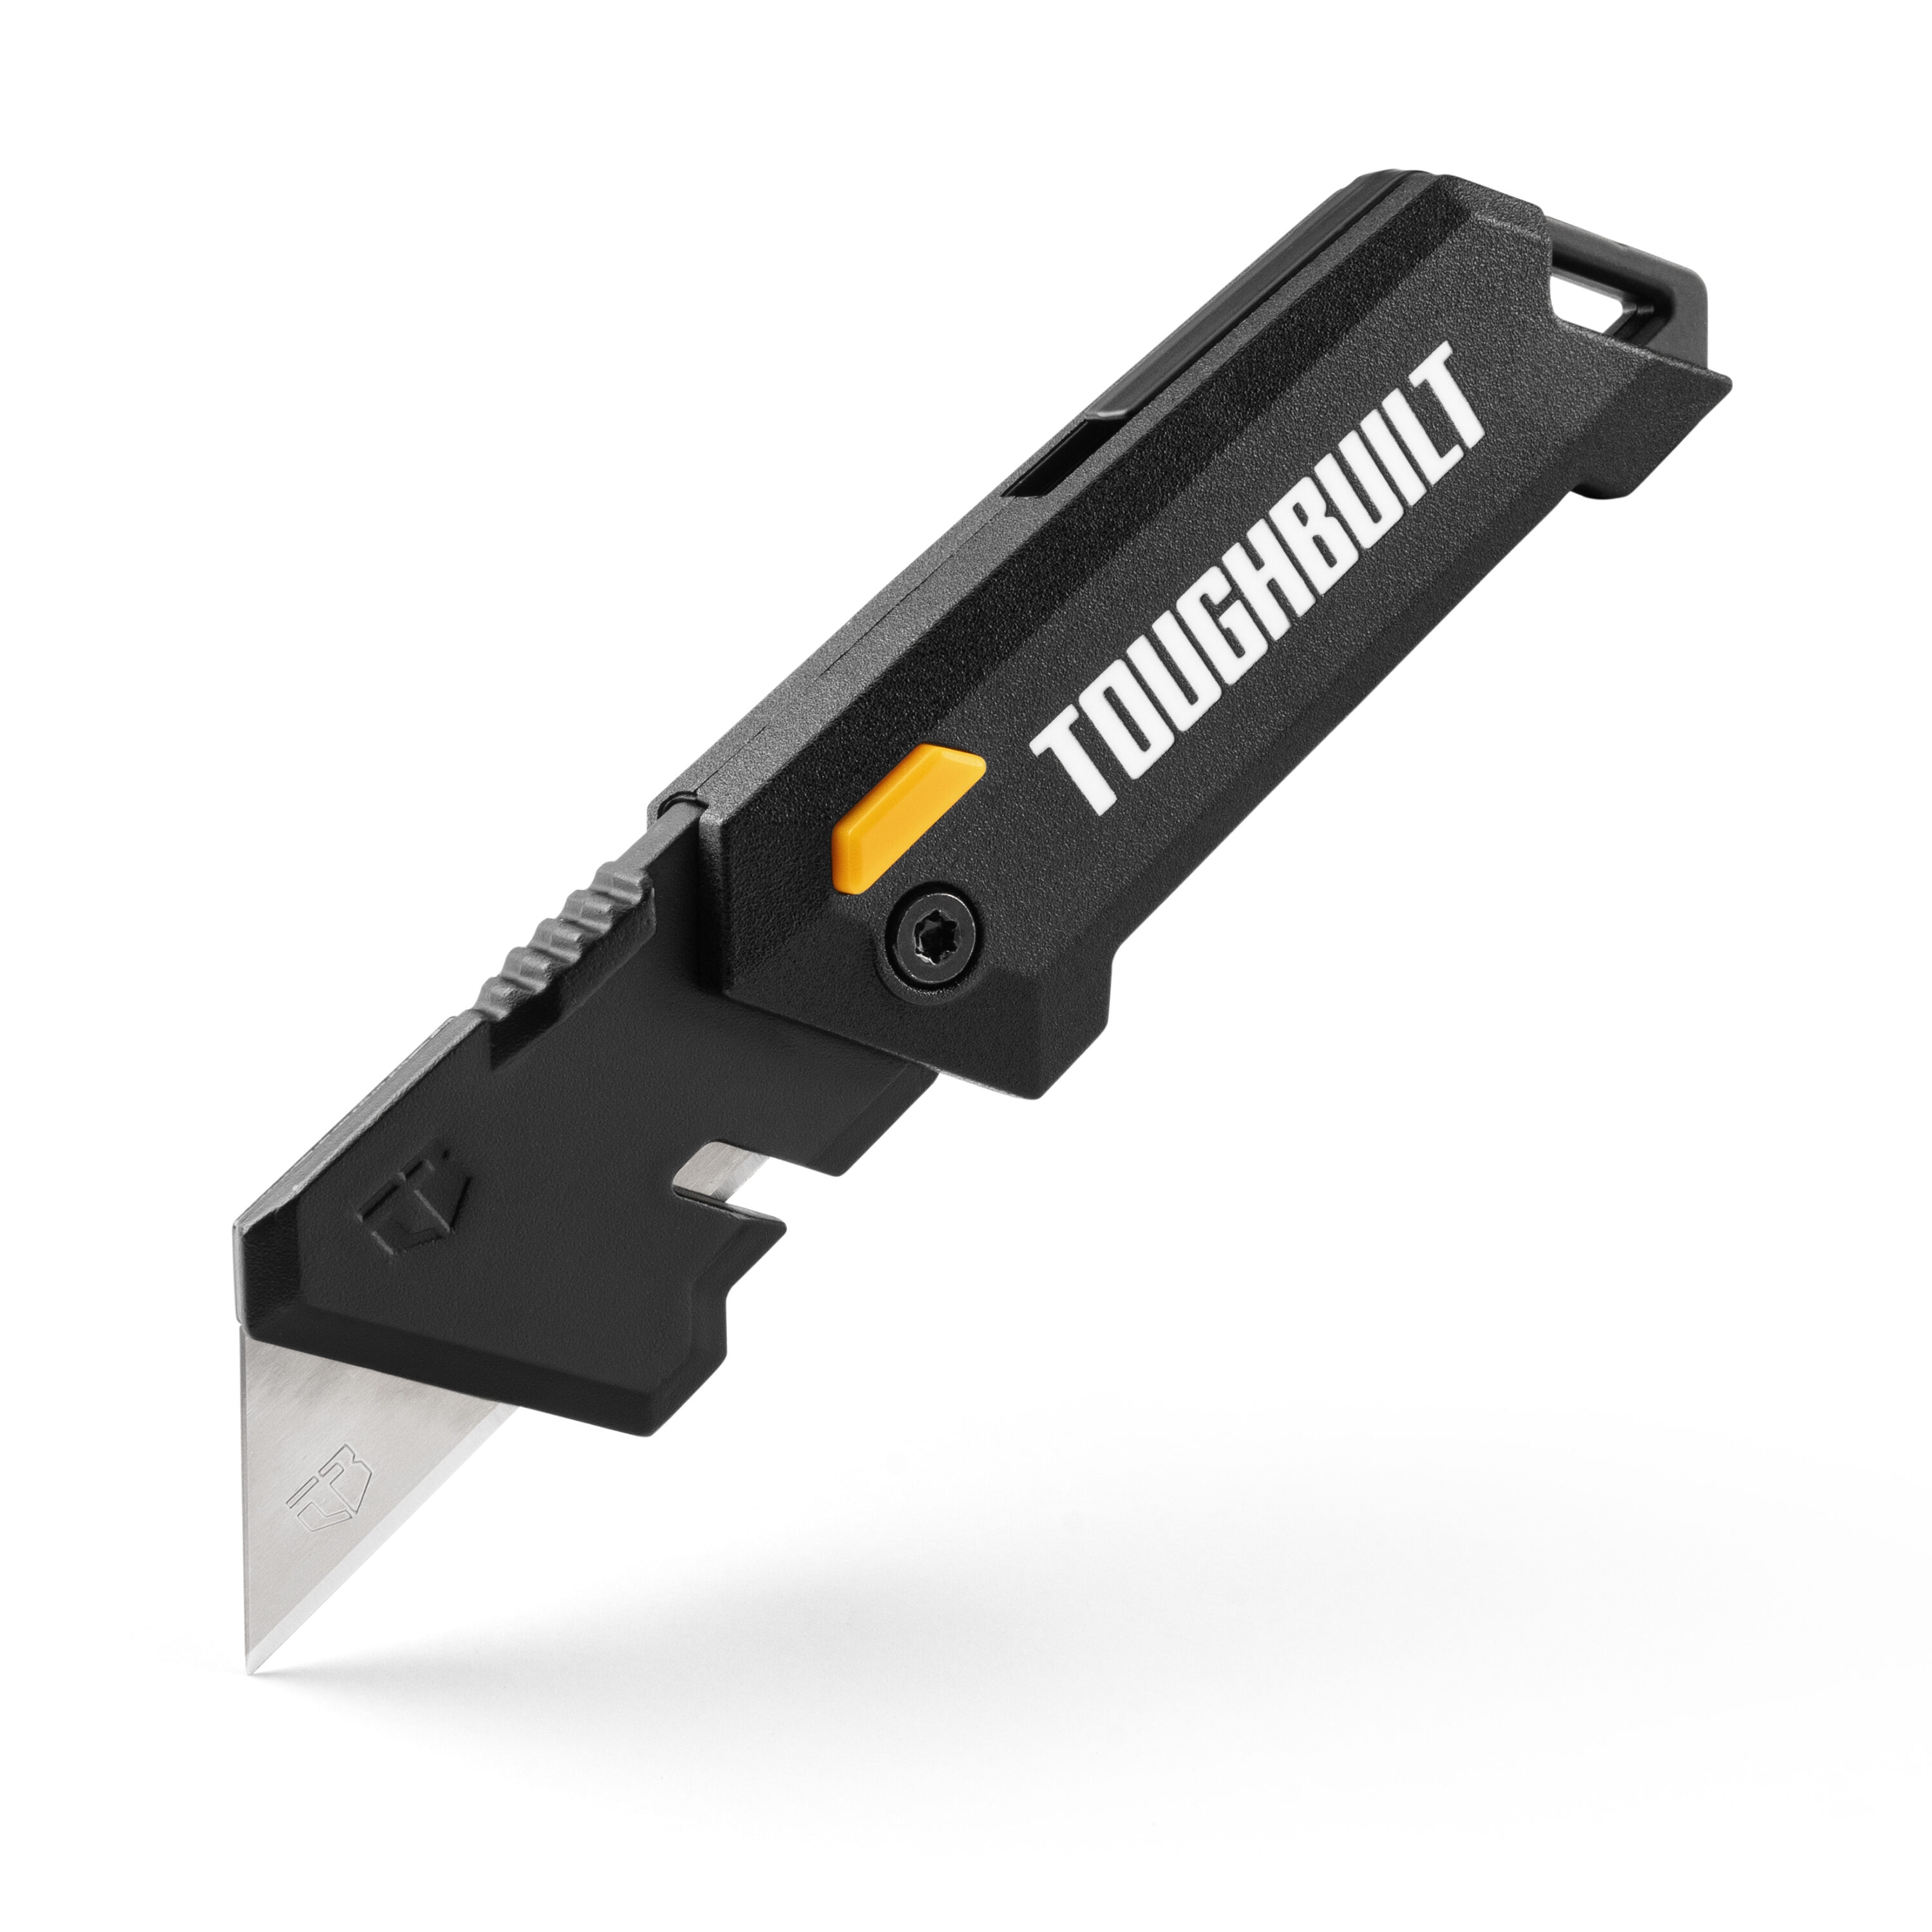 TOUGHBUILT Duct 1-in-Blade Utility Knife in the Utility Knives